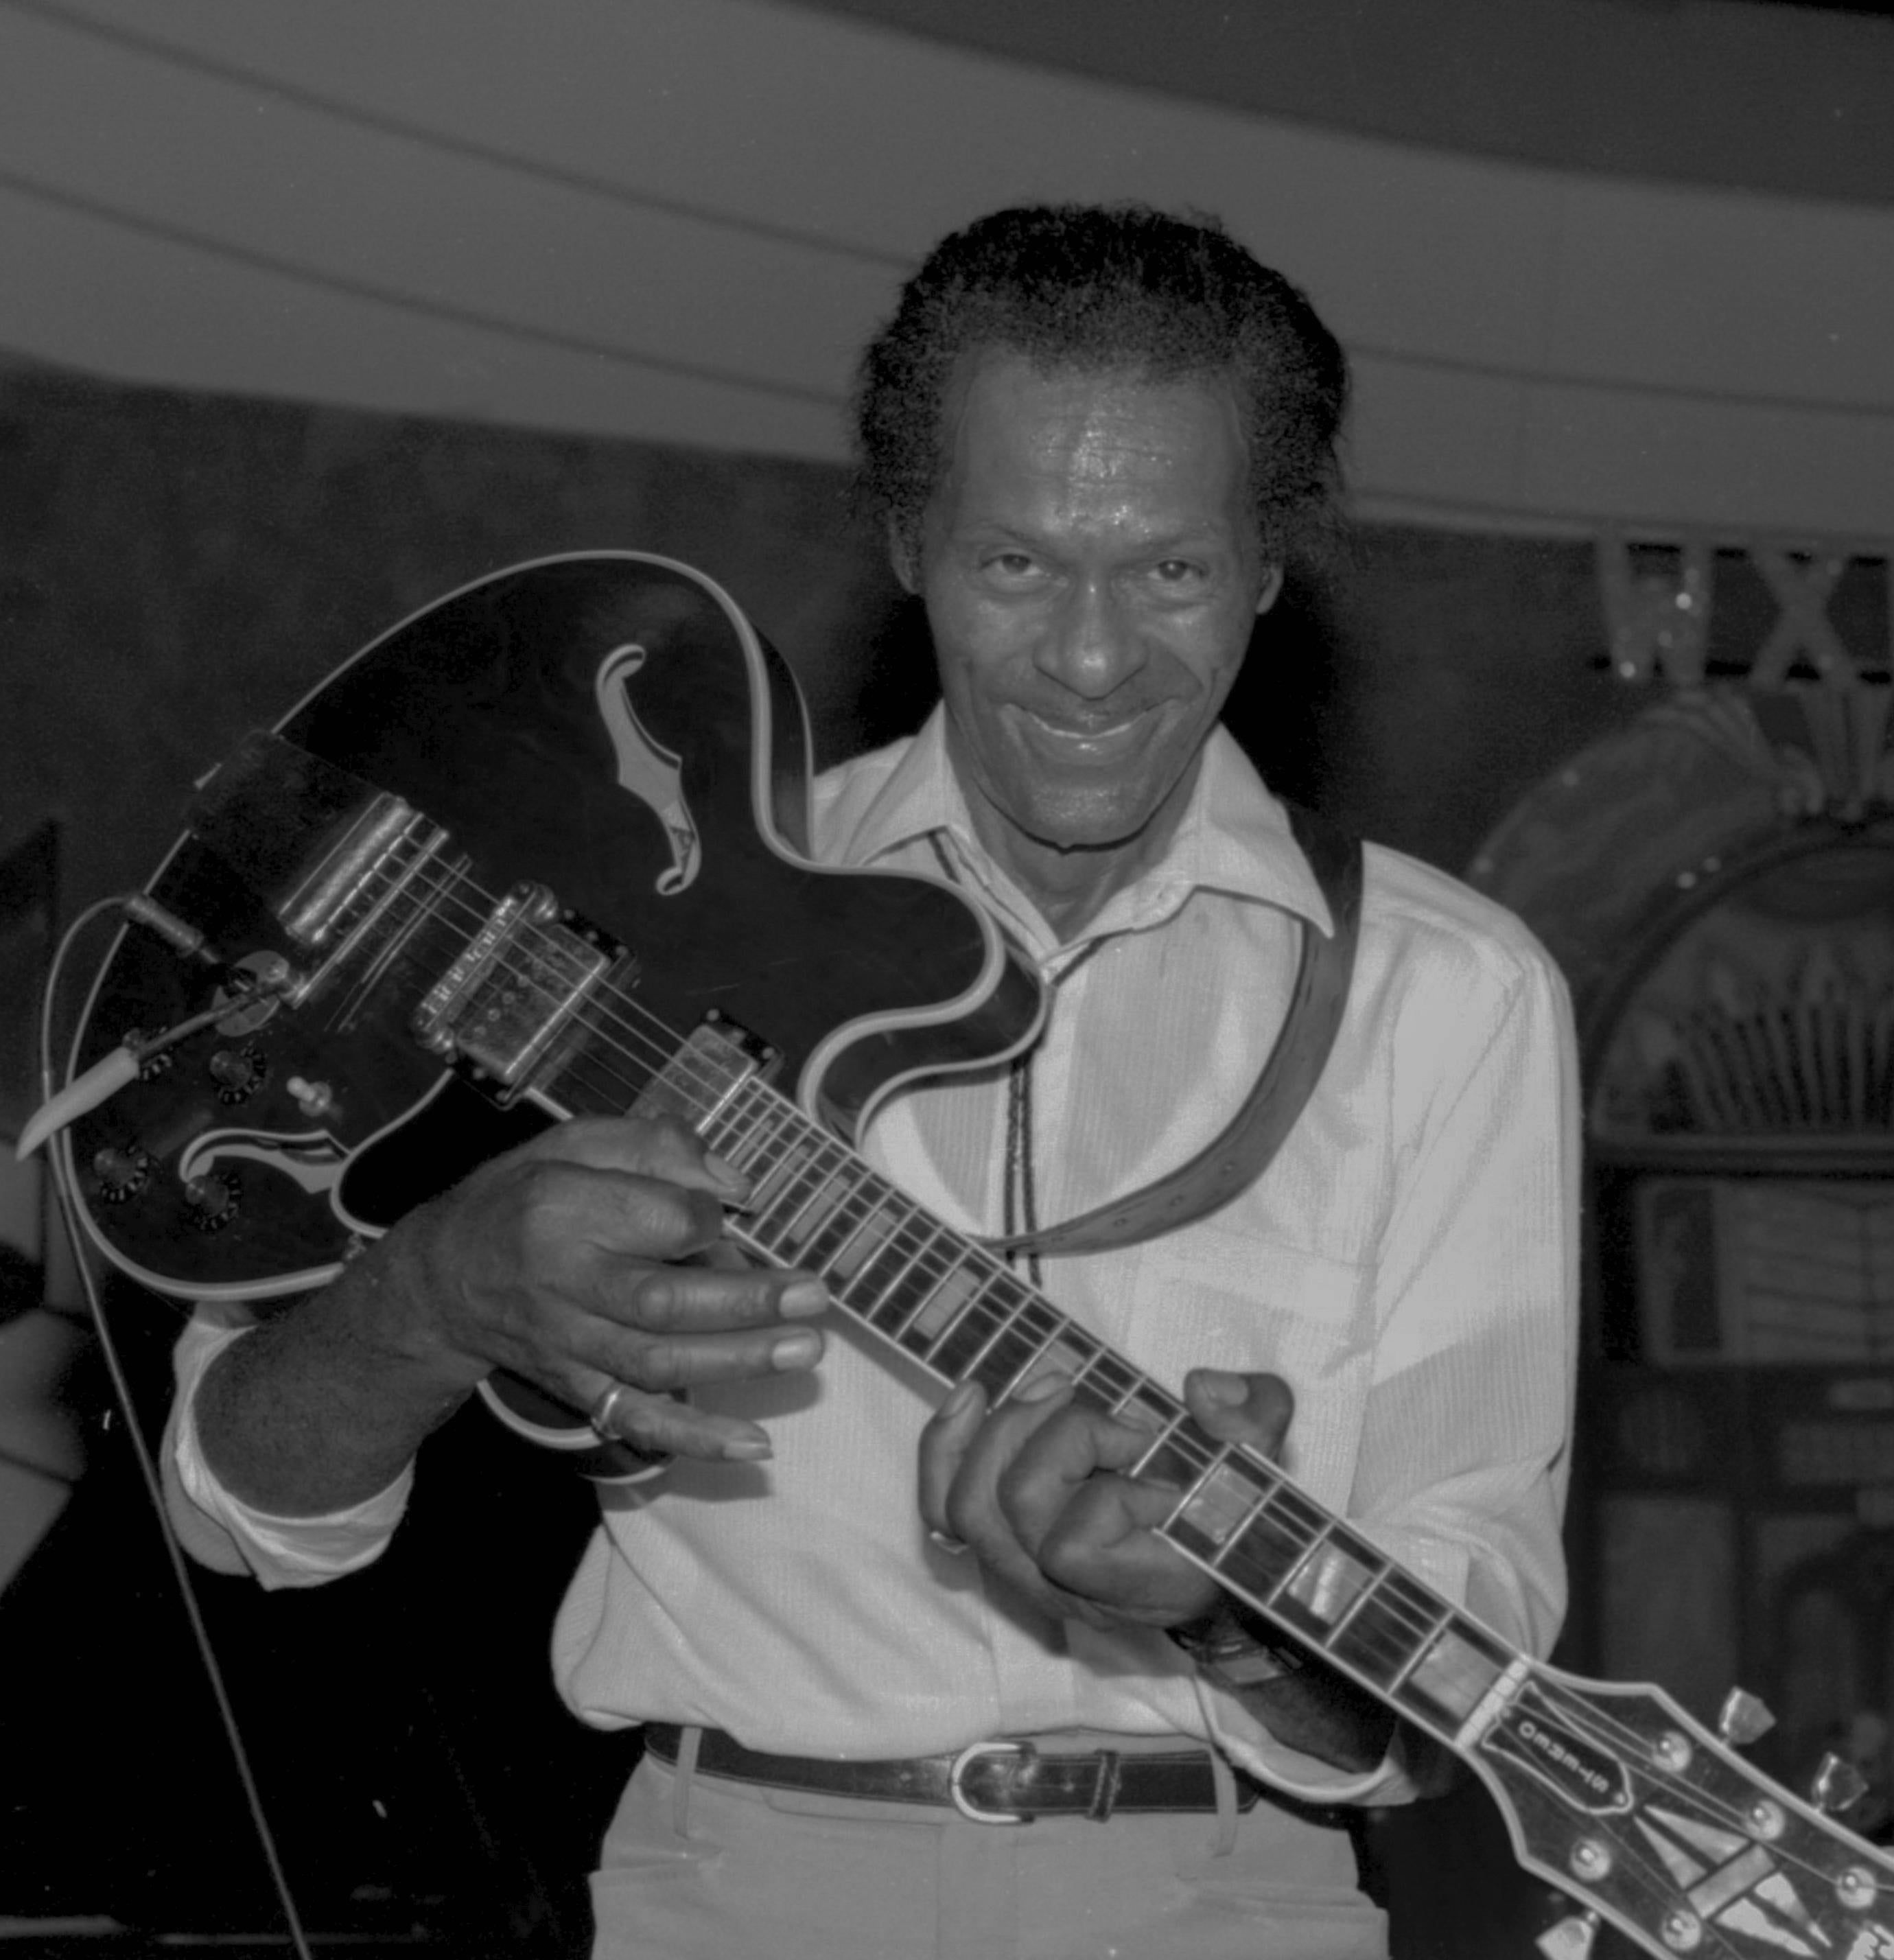 Richard Shay Black and White Photograph - Chuck Berry in Chicago, 1988 - B&W Photograph of Famed Musician, Framed